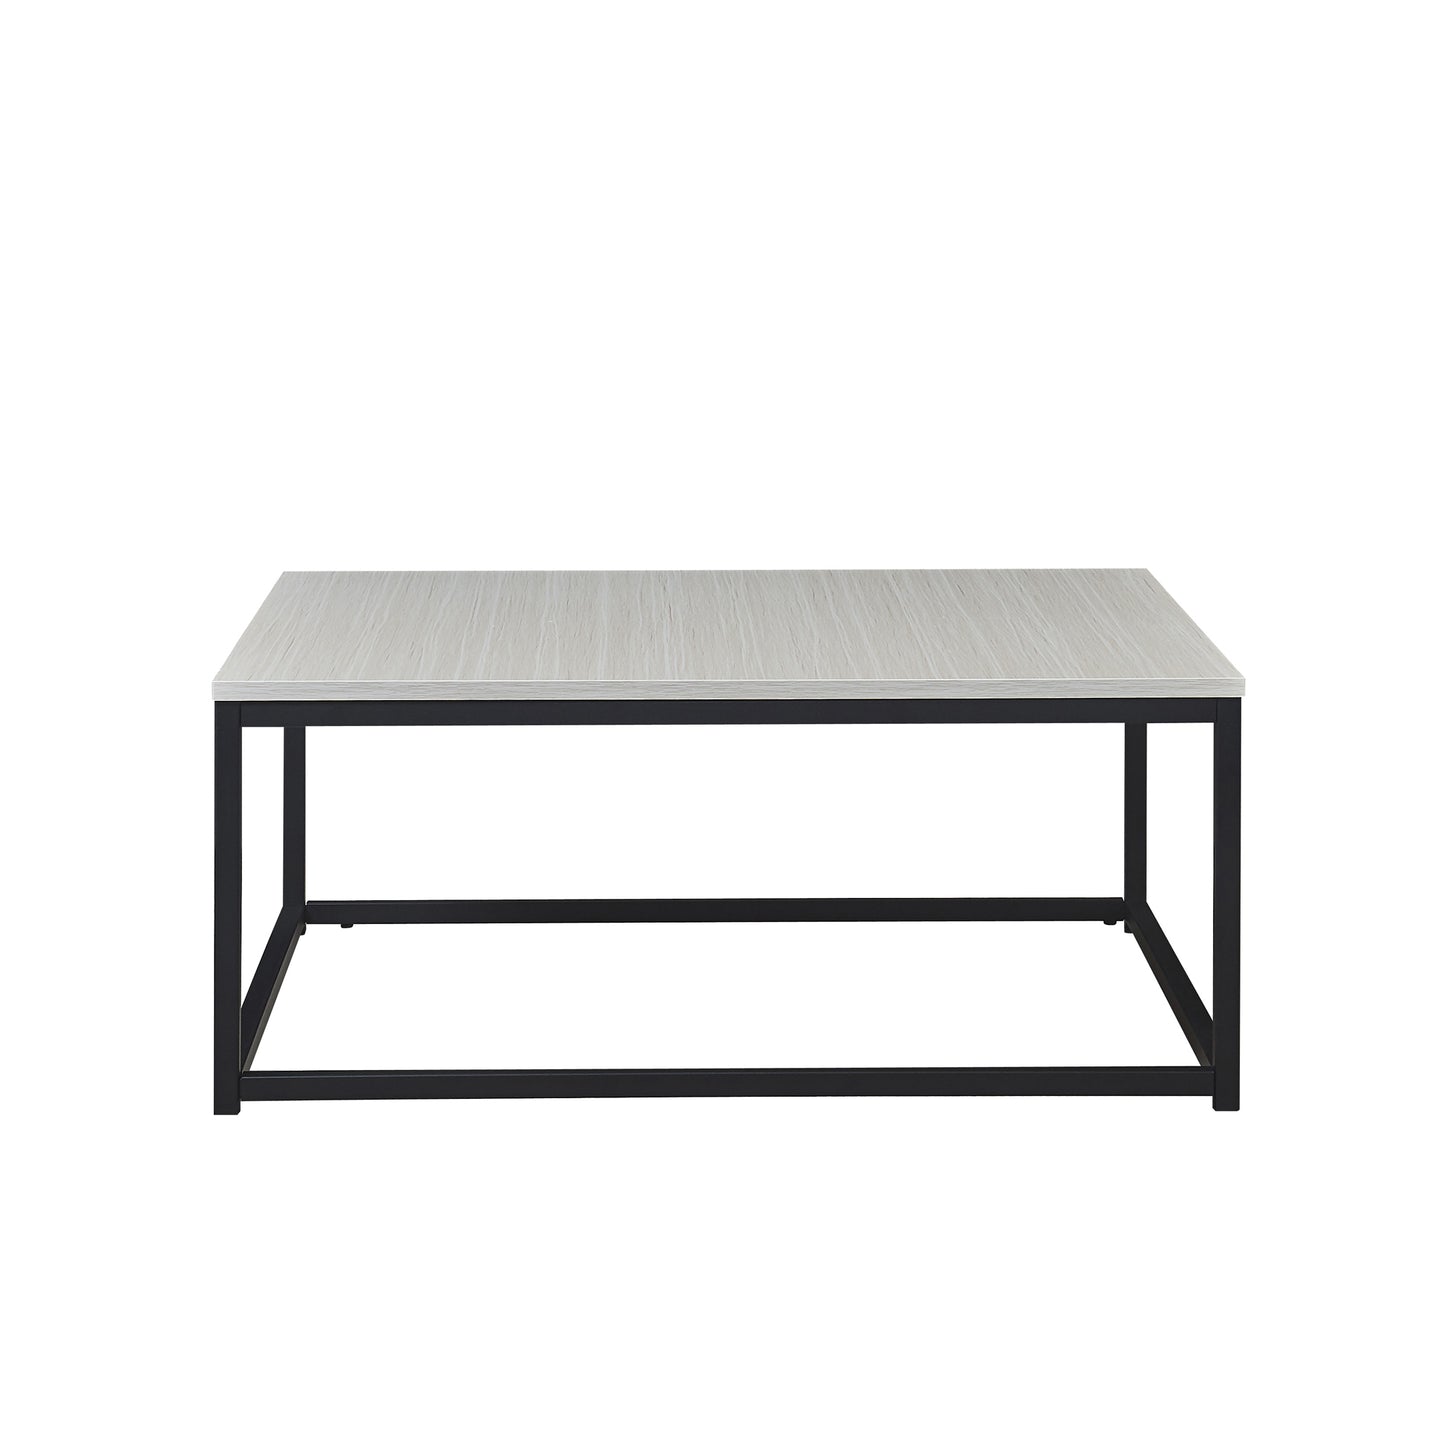 COFFEE TABLE (BEIGE) (square) +for kitchen, restaurant, bedroom, living room and many other occasions